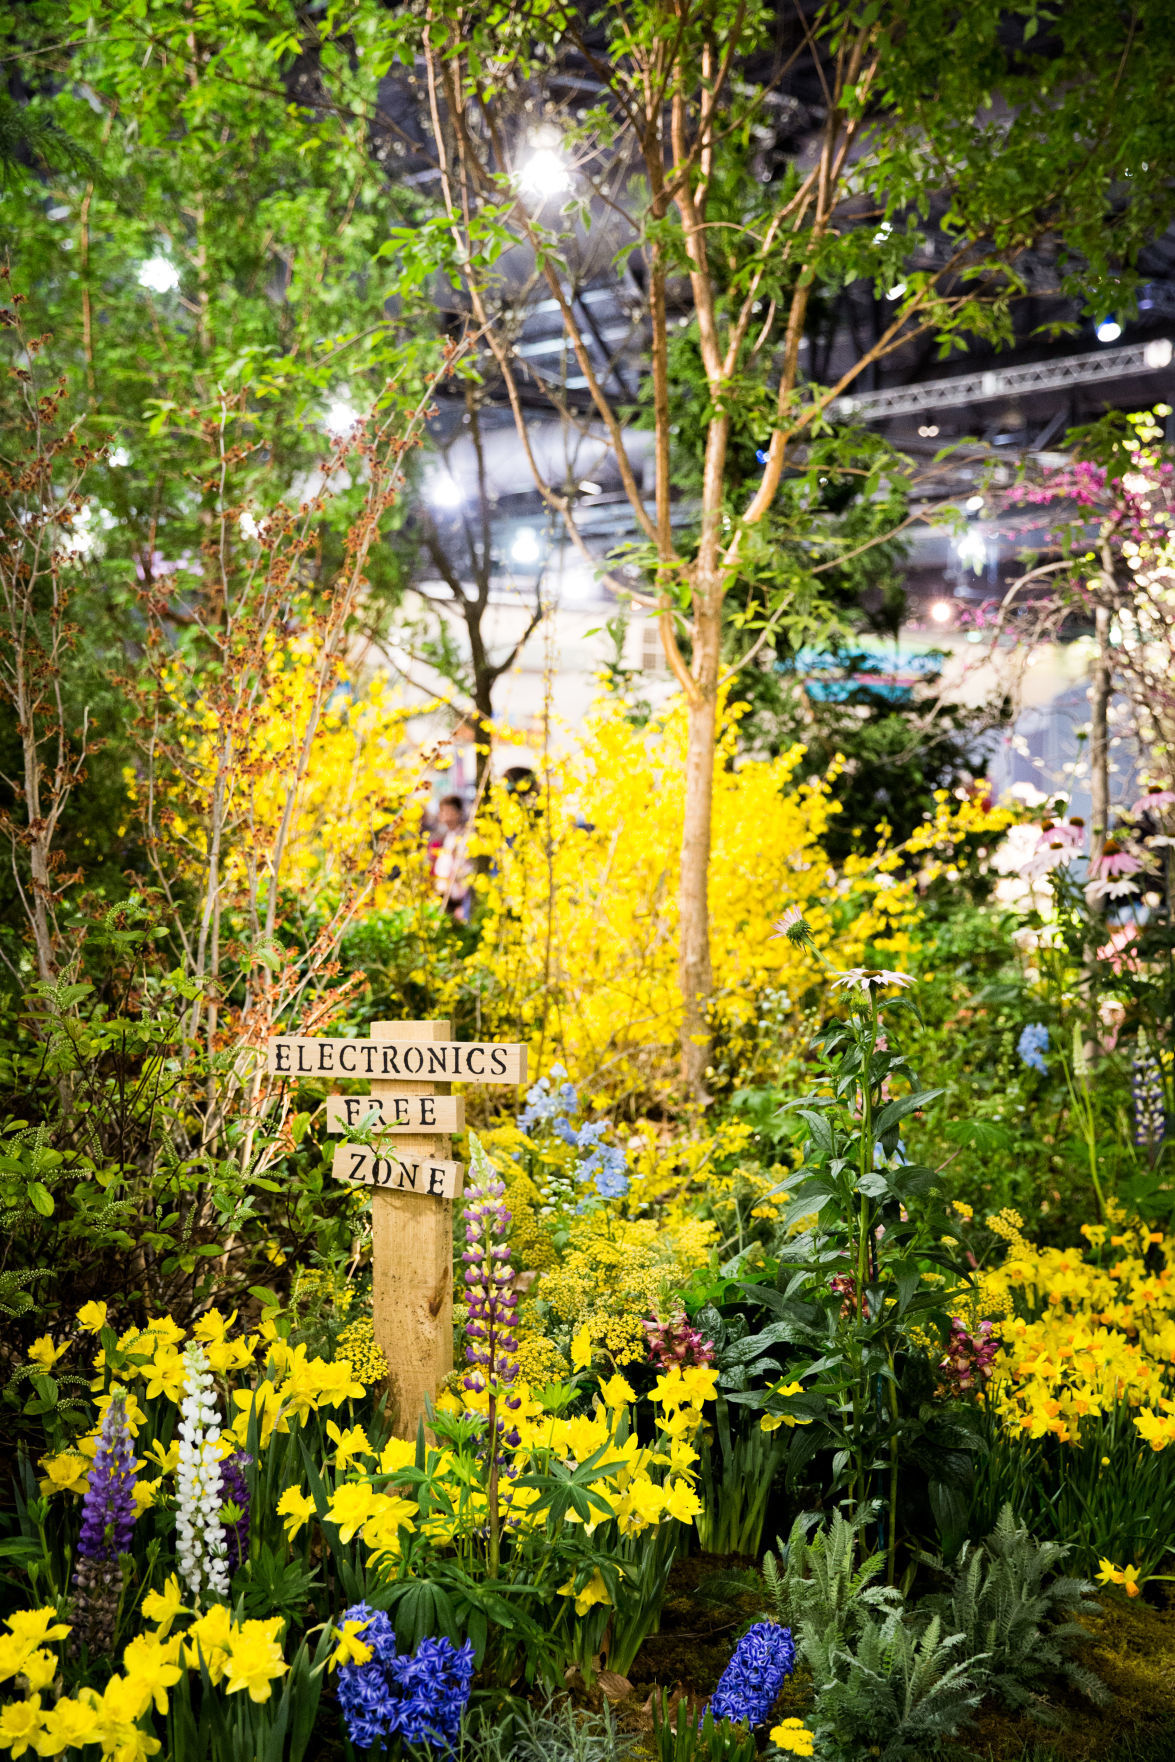 The Ultimate Guide To The 2020 Philadelphia Flower Show